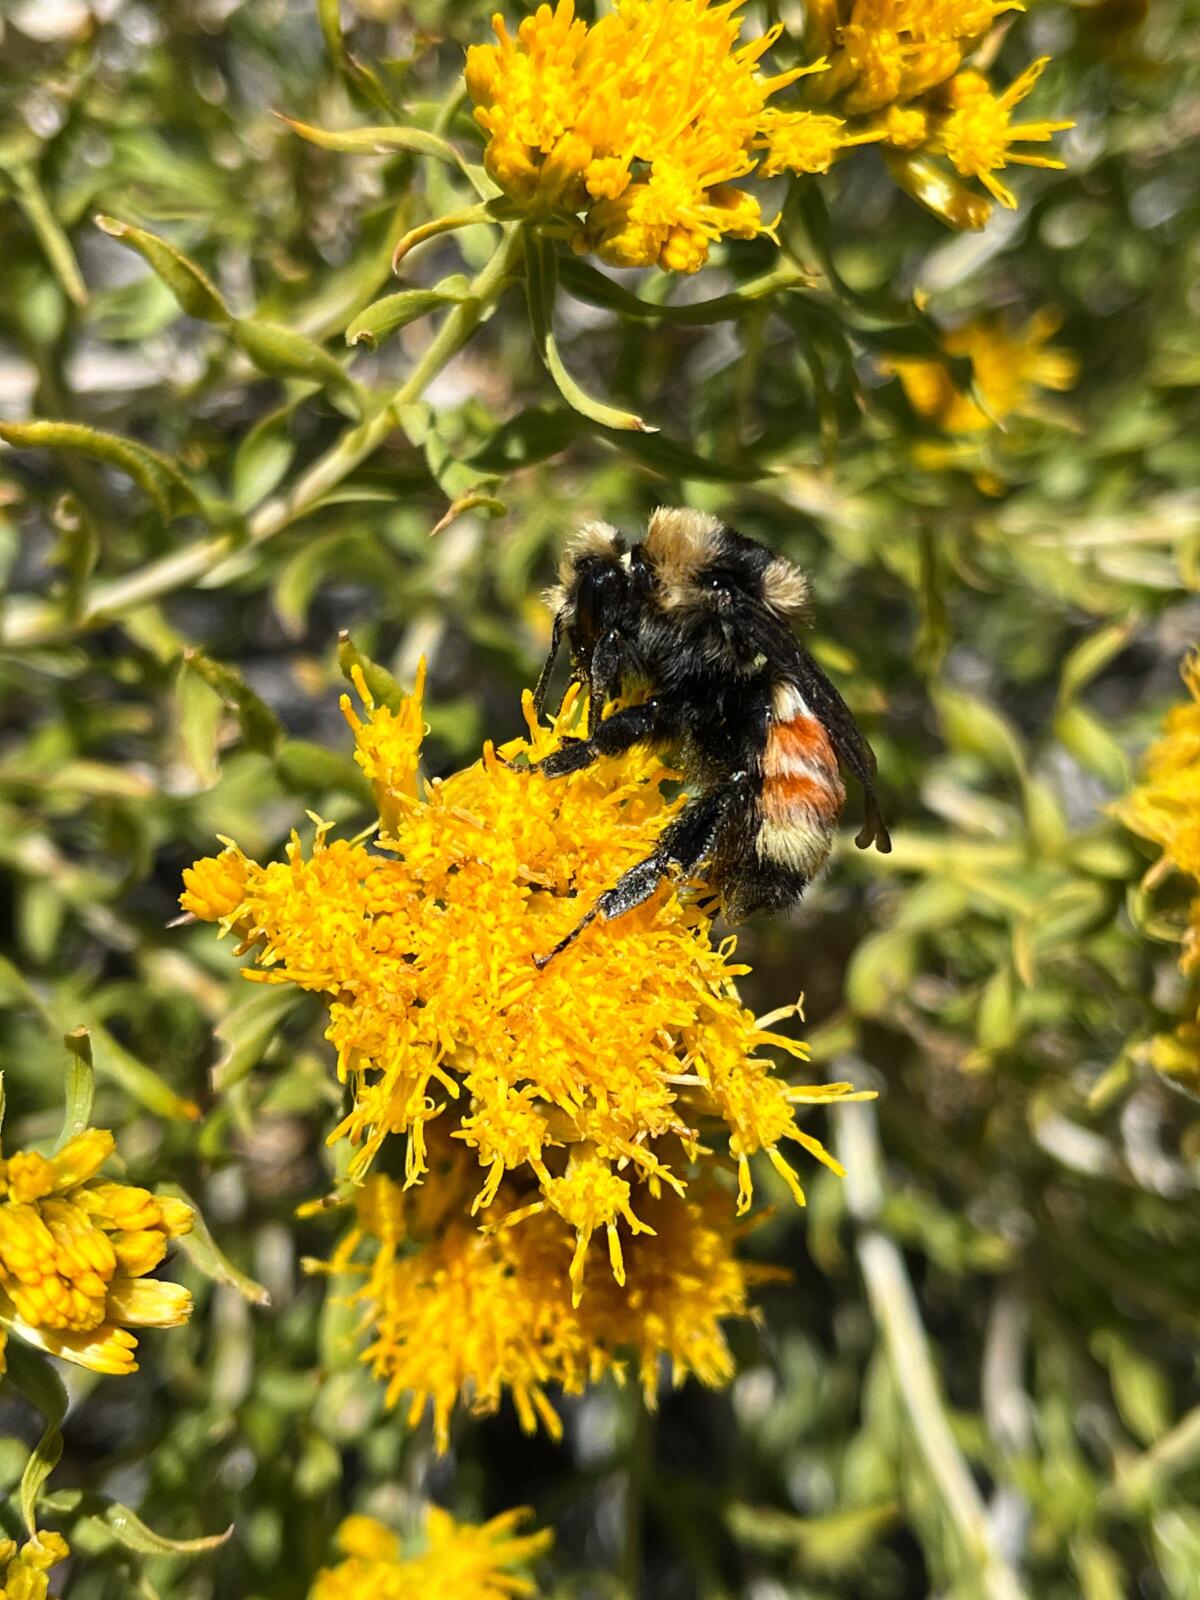 A Bombus huntii, also known as a Hunt's bumblebee, queen on rabbitbrush near the White Mountains.